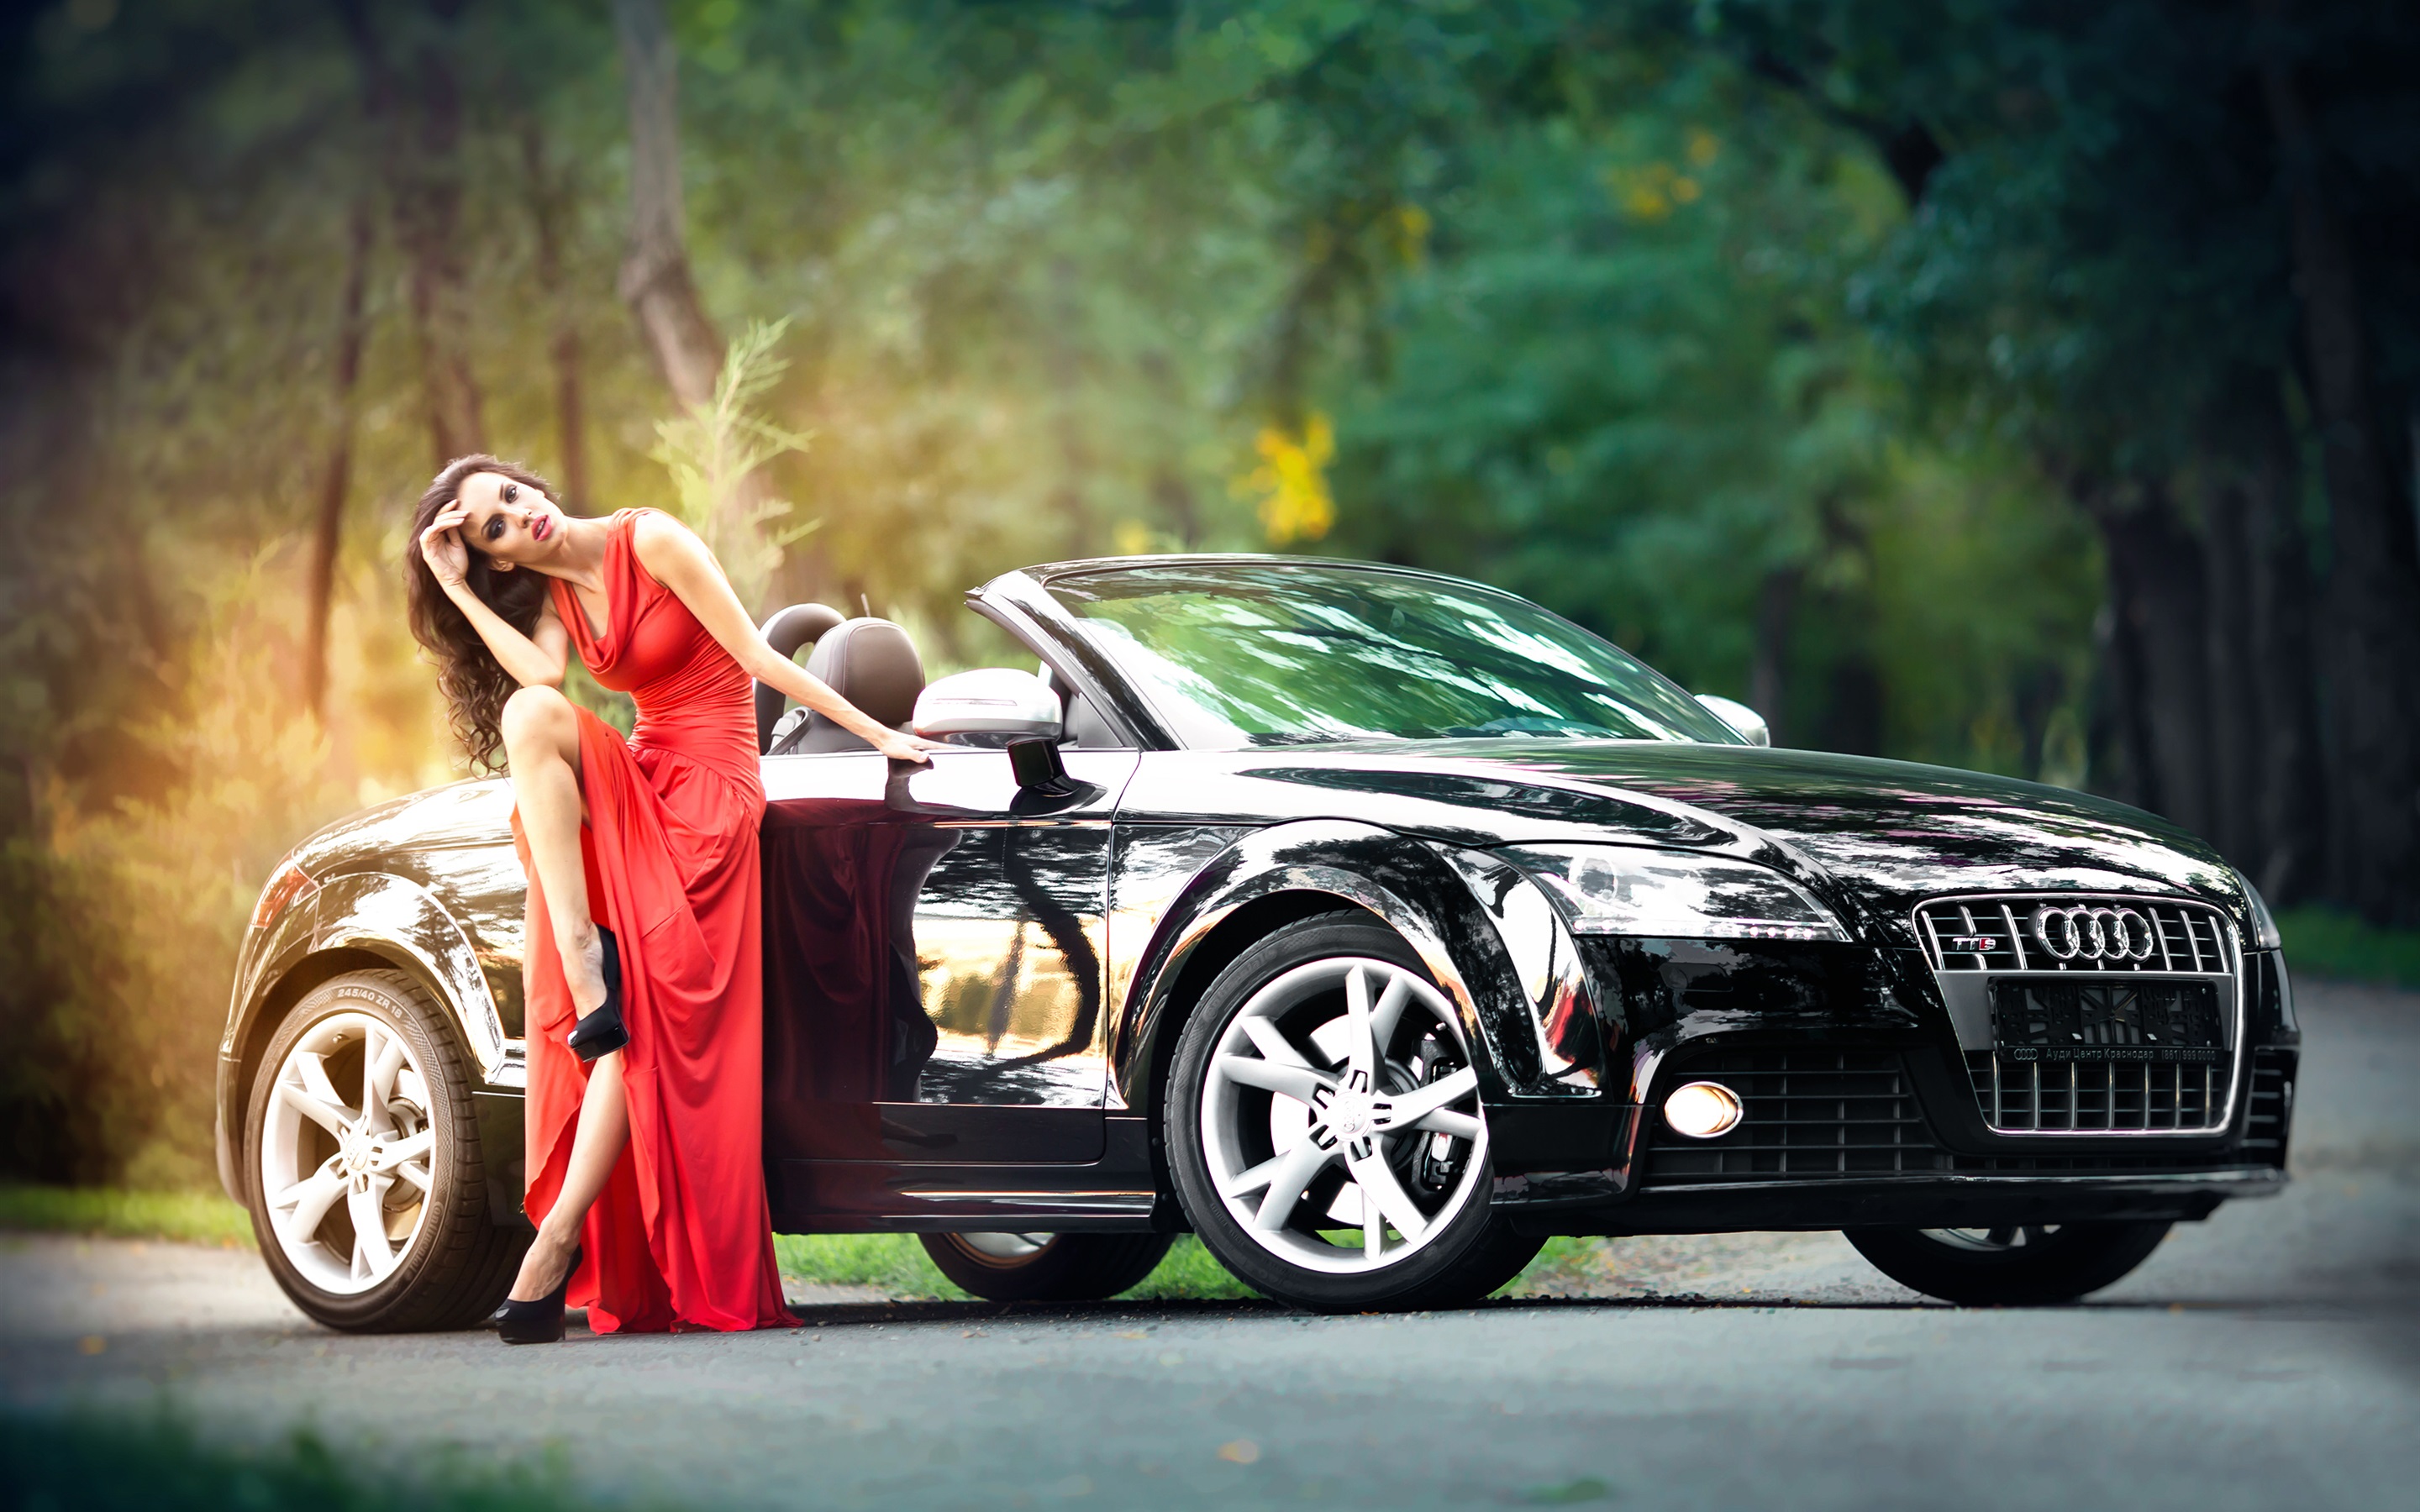 Wallpaper Red Dress Girl And Black Audi Car HD Picture